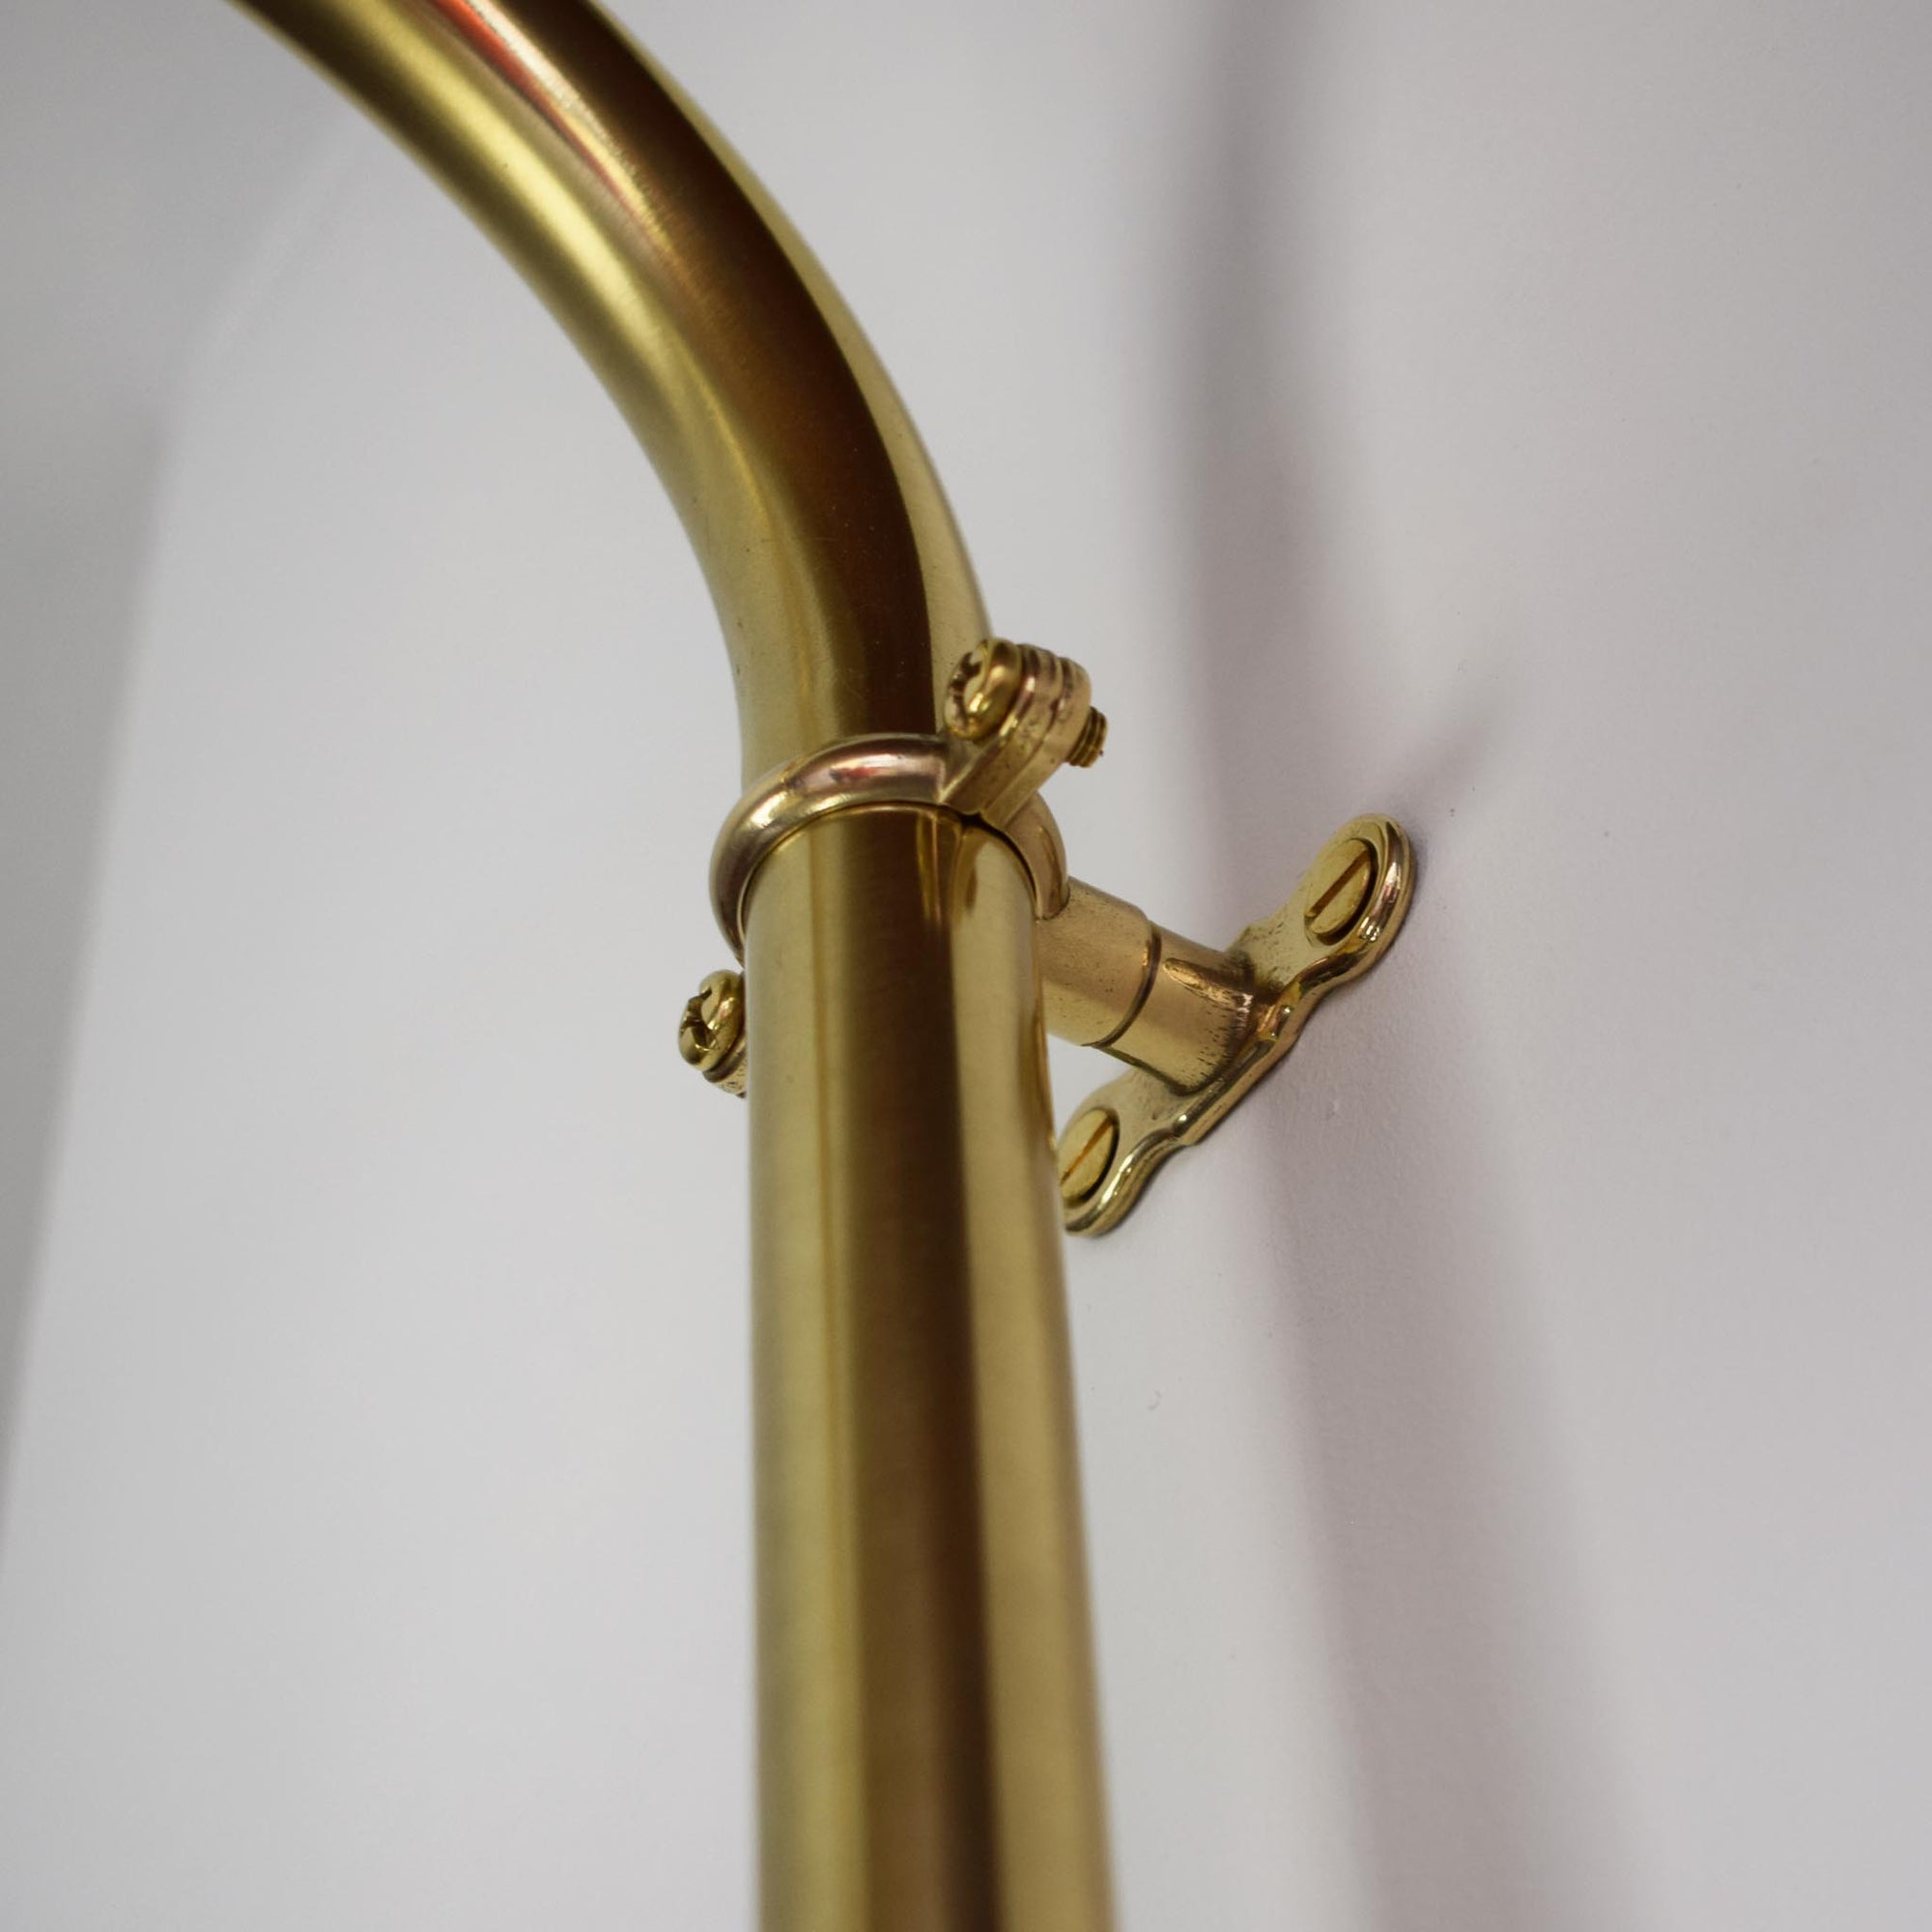 brass shower spout, made in england